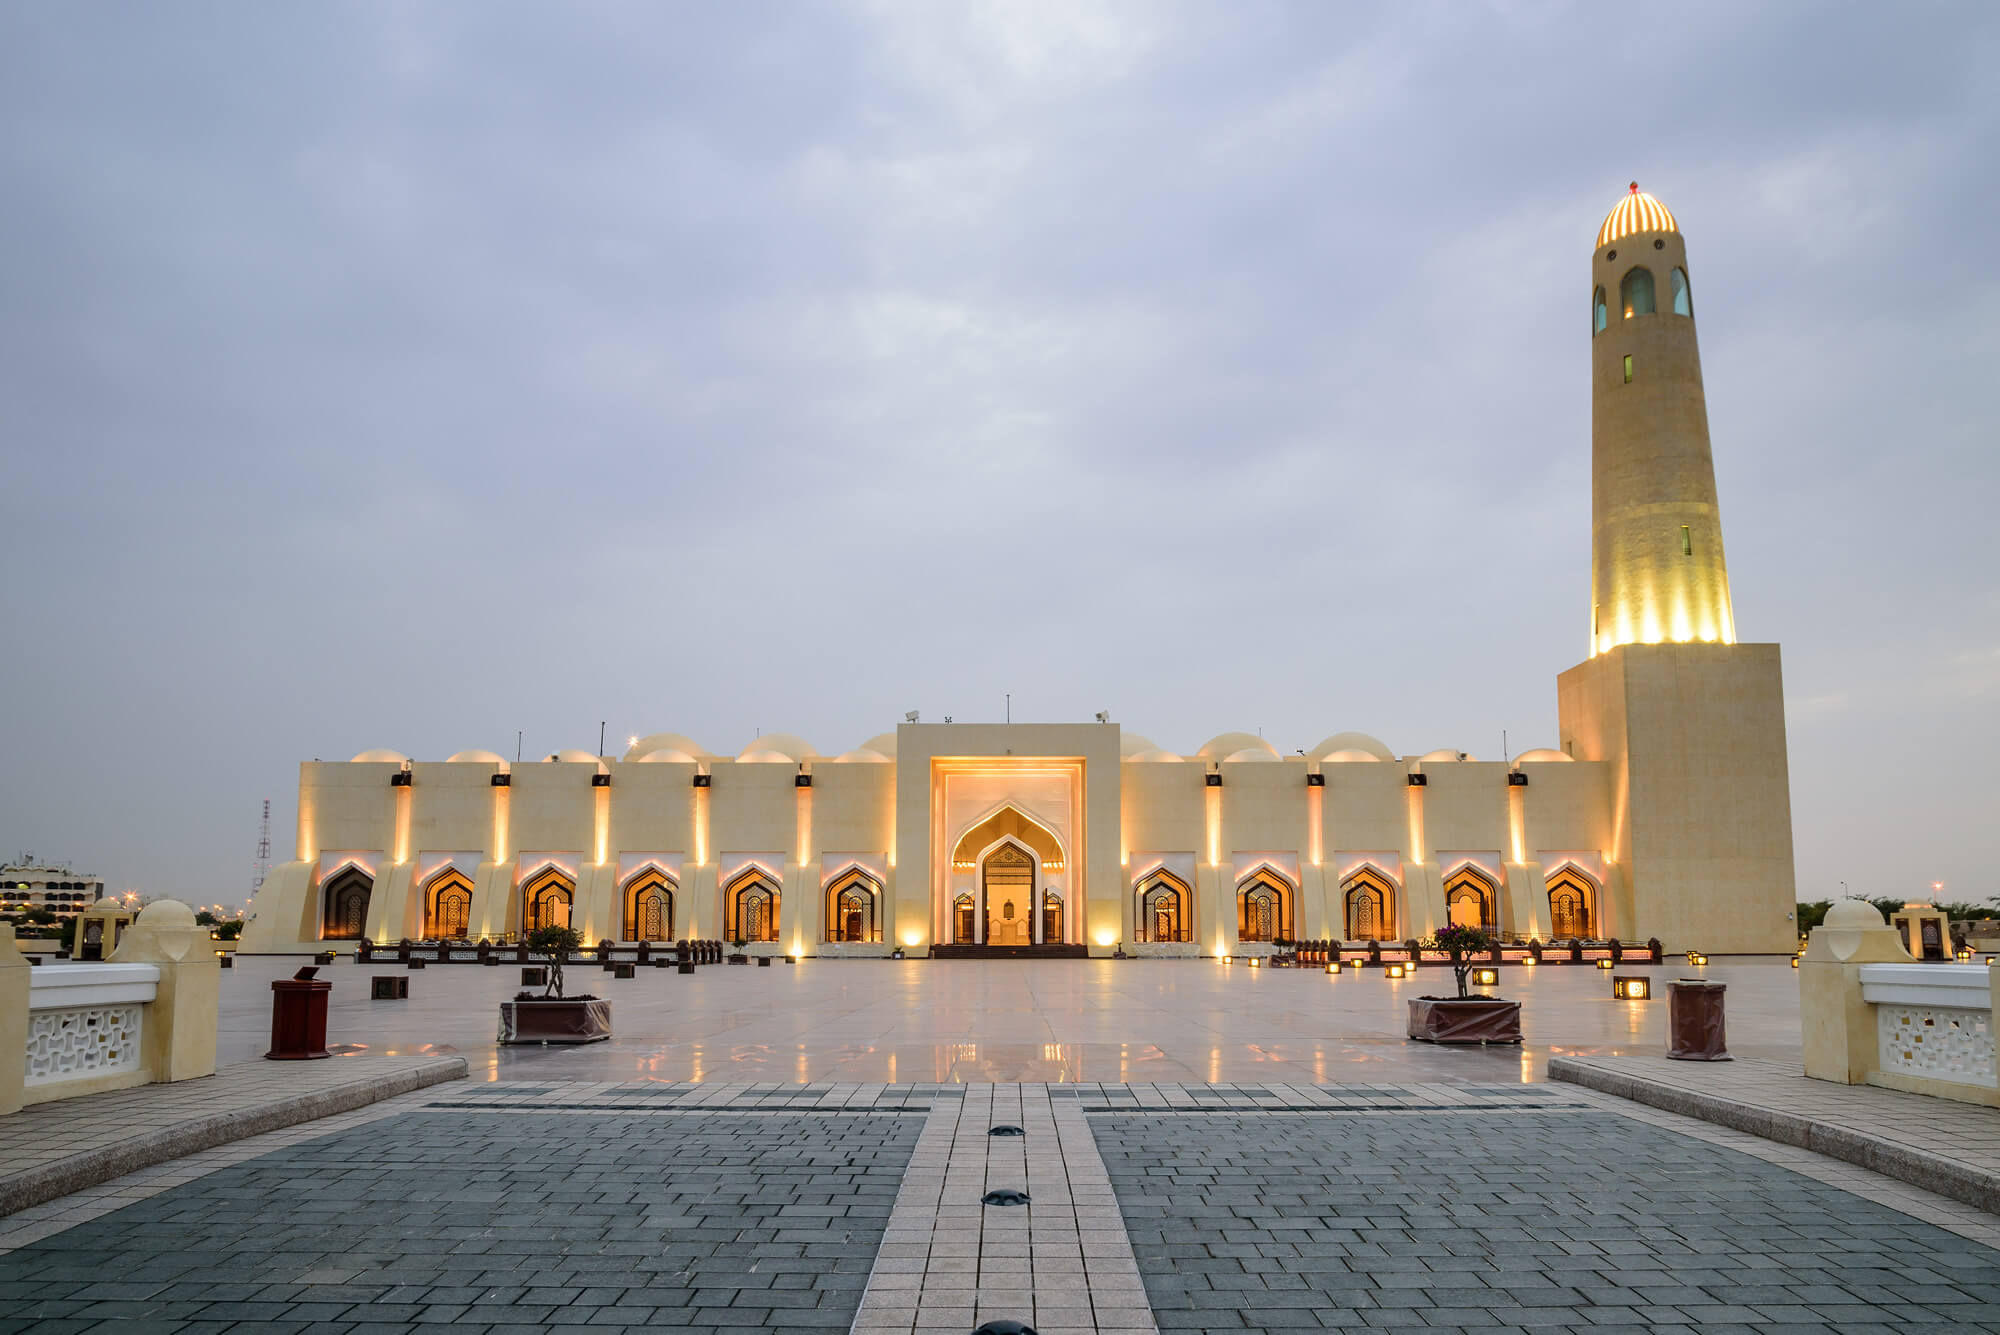 The State Mosque of Qatar